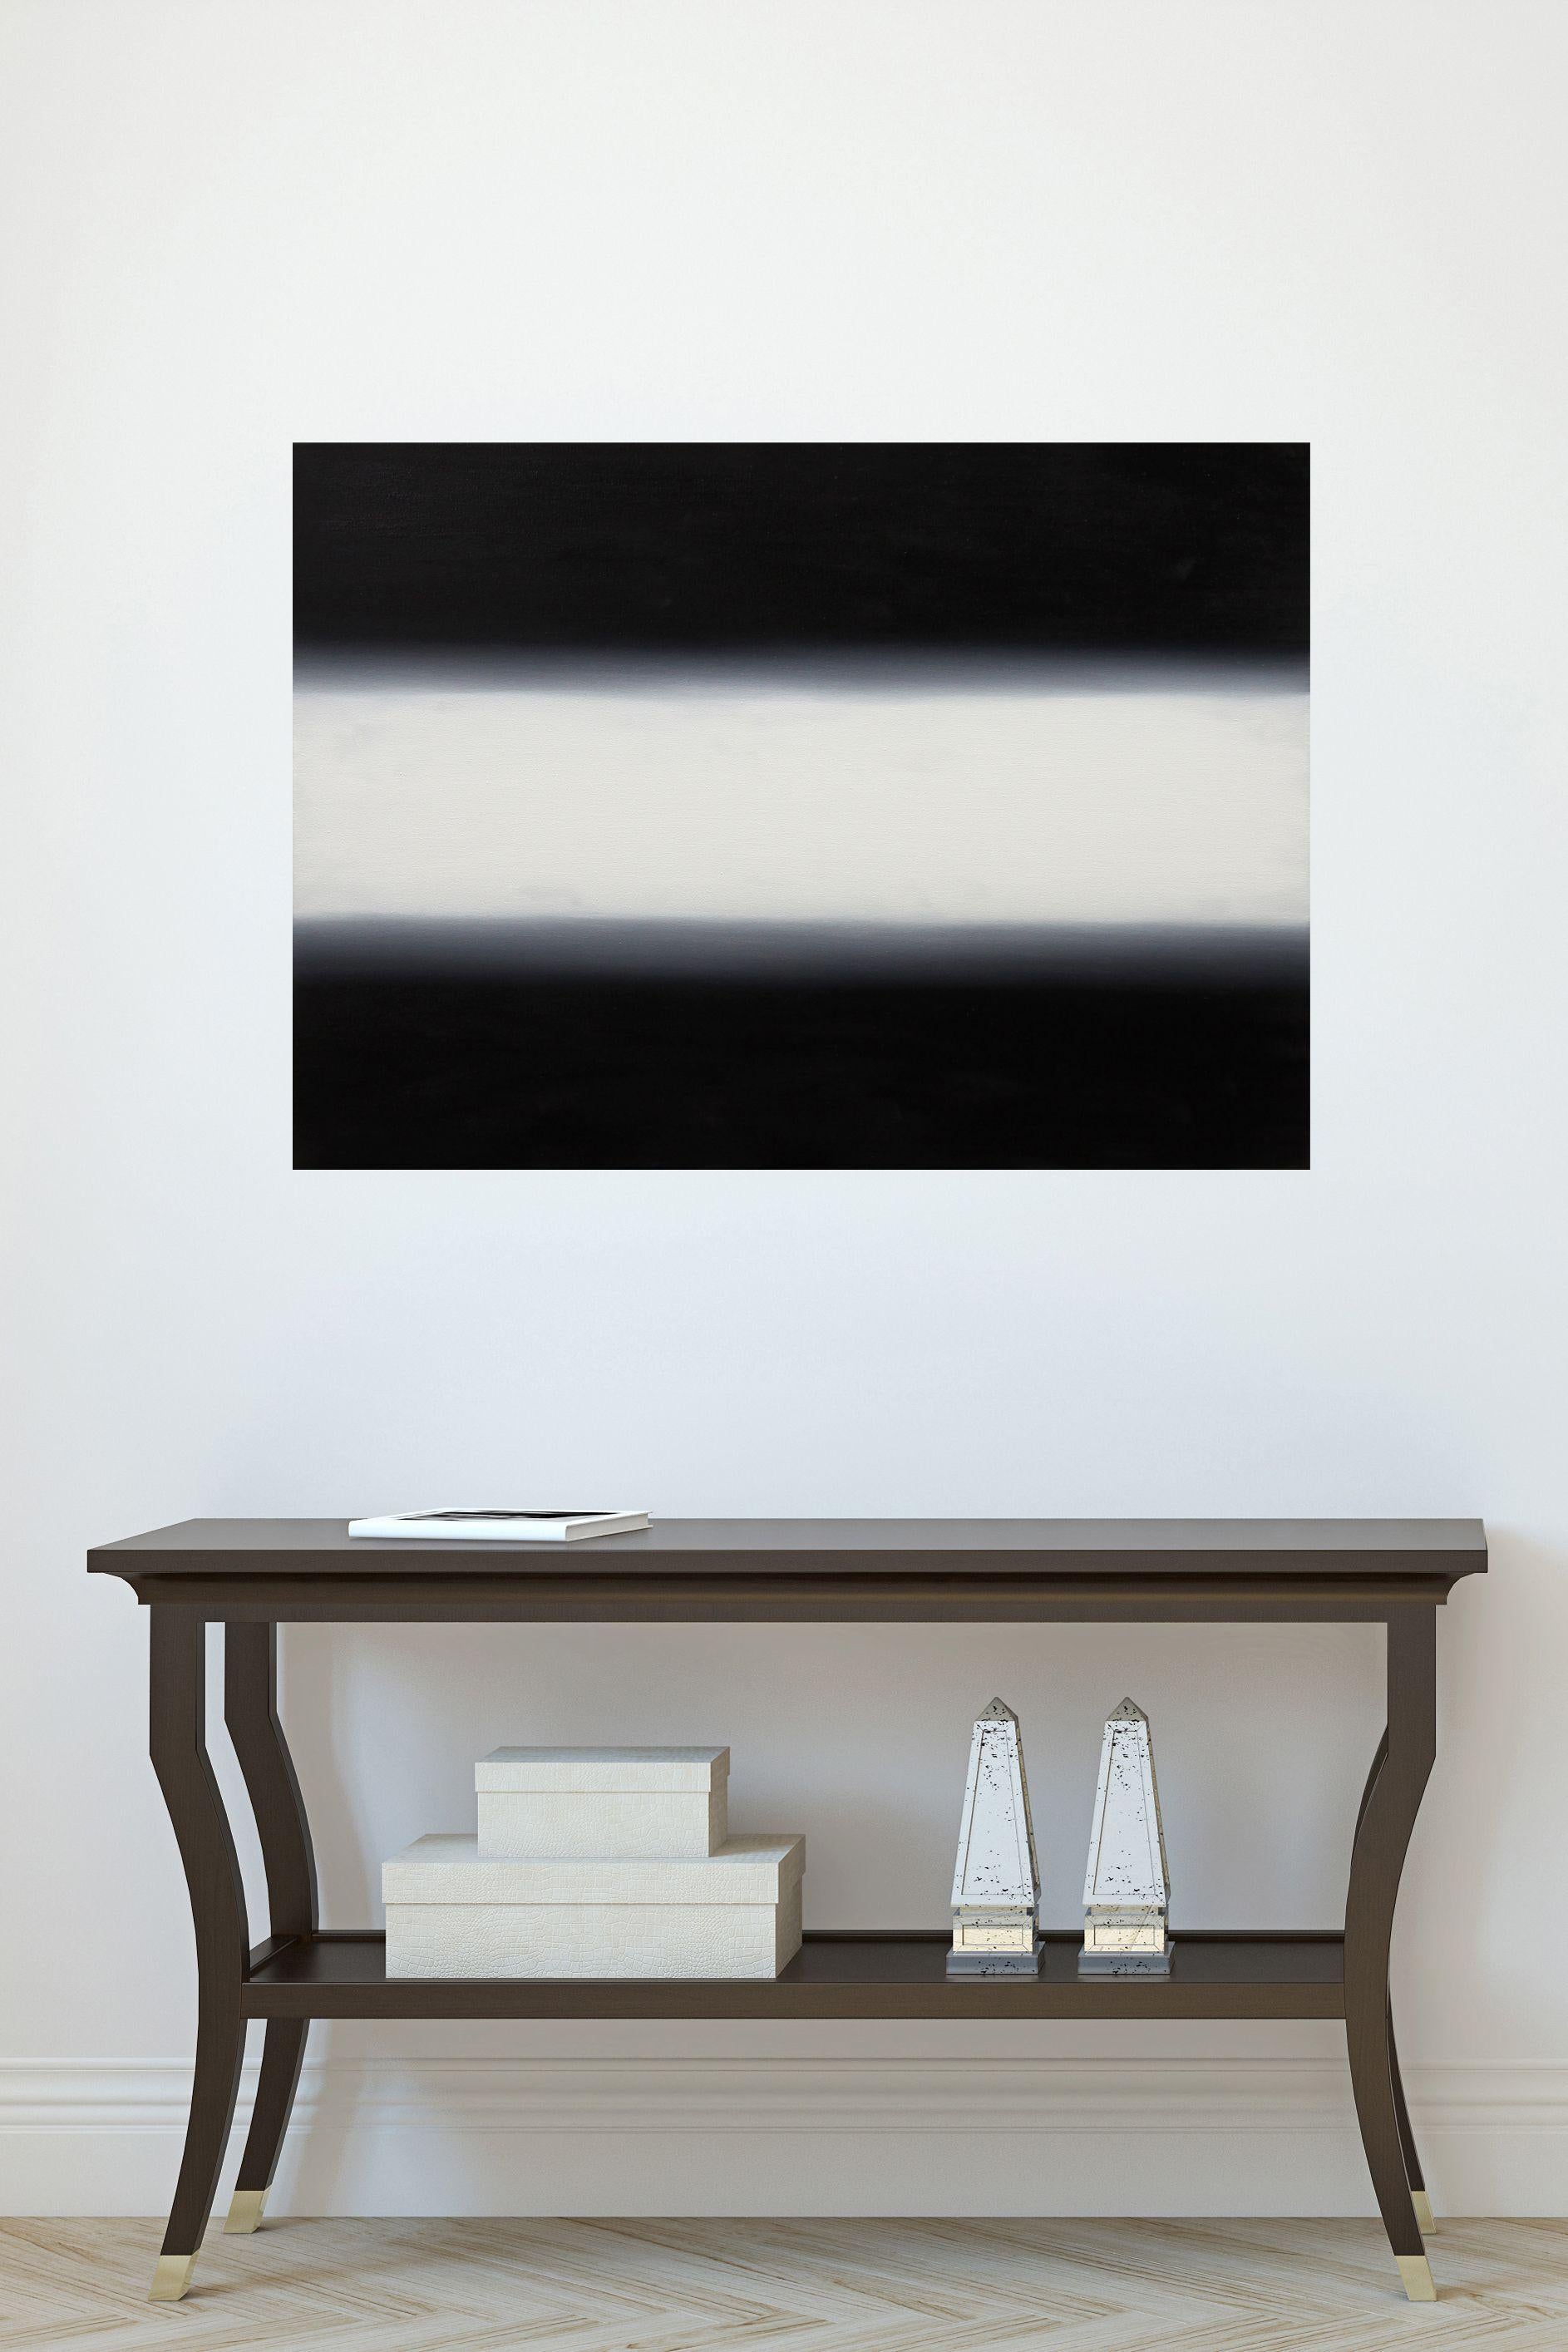 White light on black 50 x 70 cm., Painting, Oil on Canvas - Black Abstract Painting by Irjan Moussin